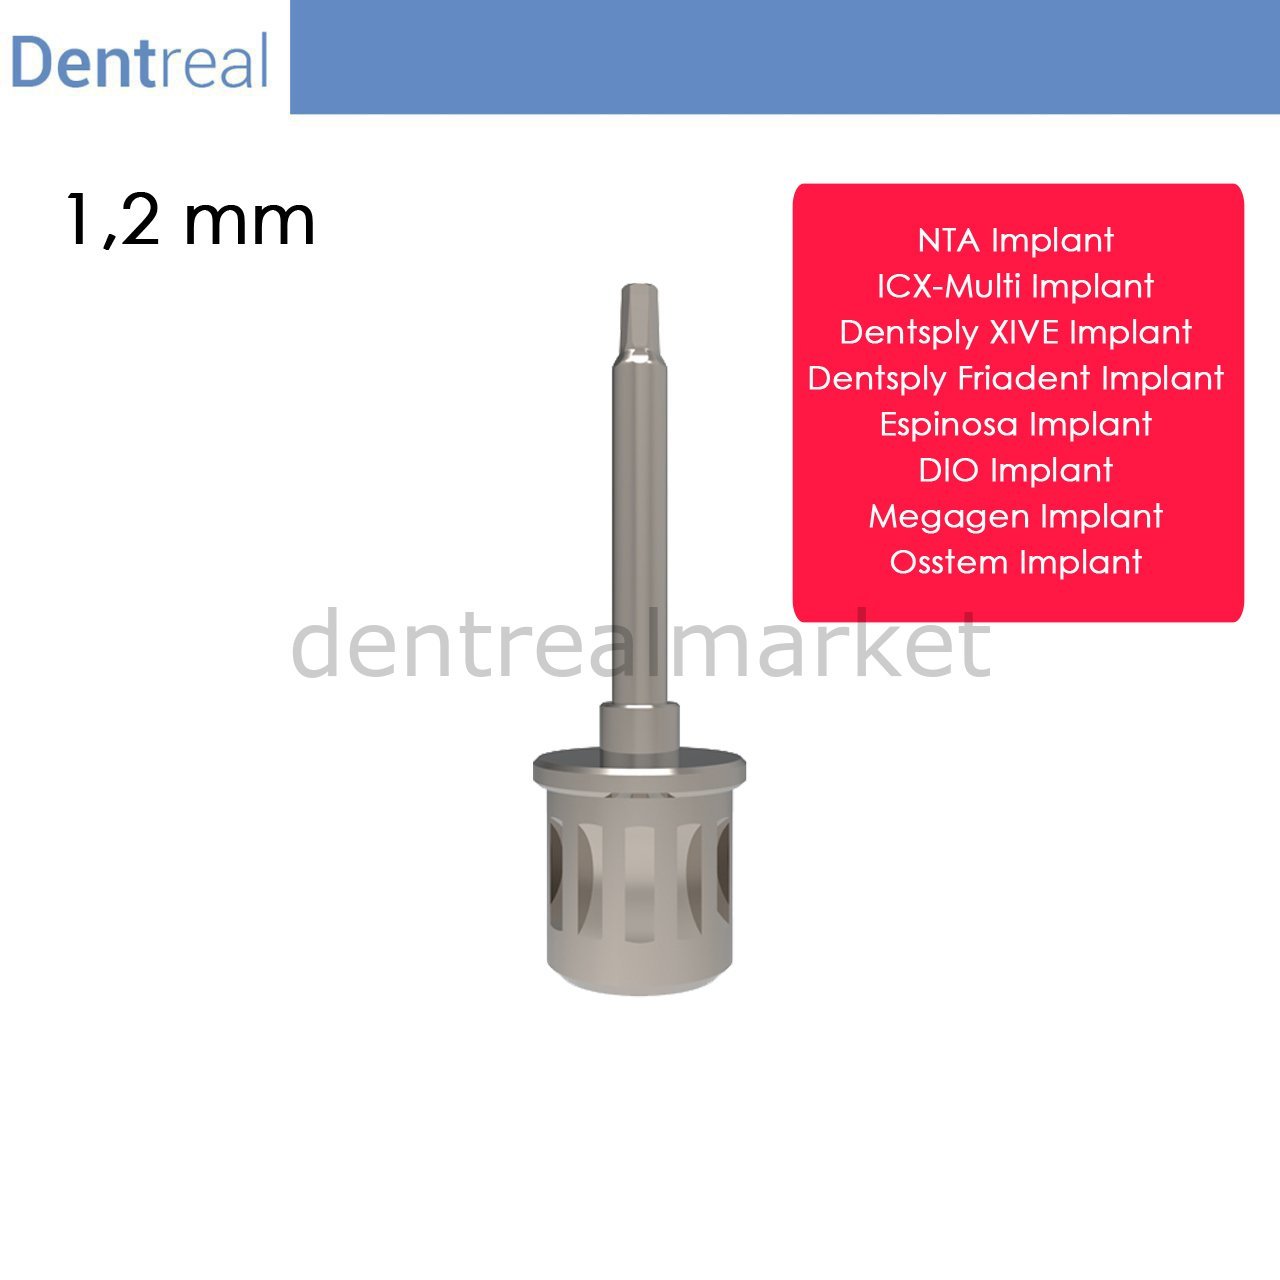 DentrealStore - Dentreal Screwdriver for ICX-Multi Implant - 1,20 mm Hex Driver